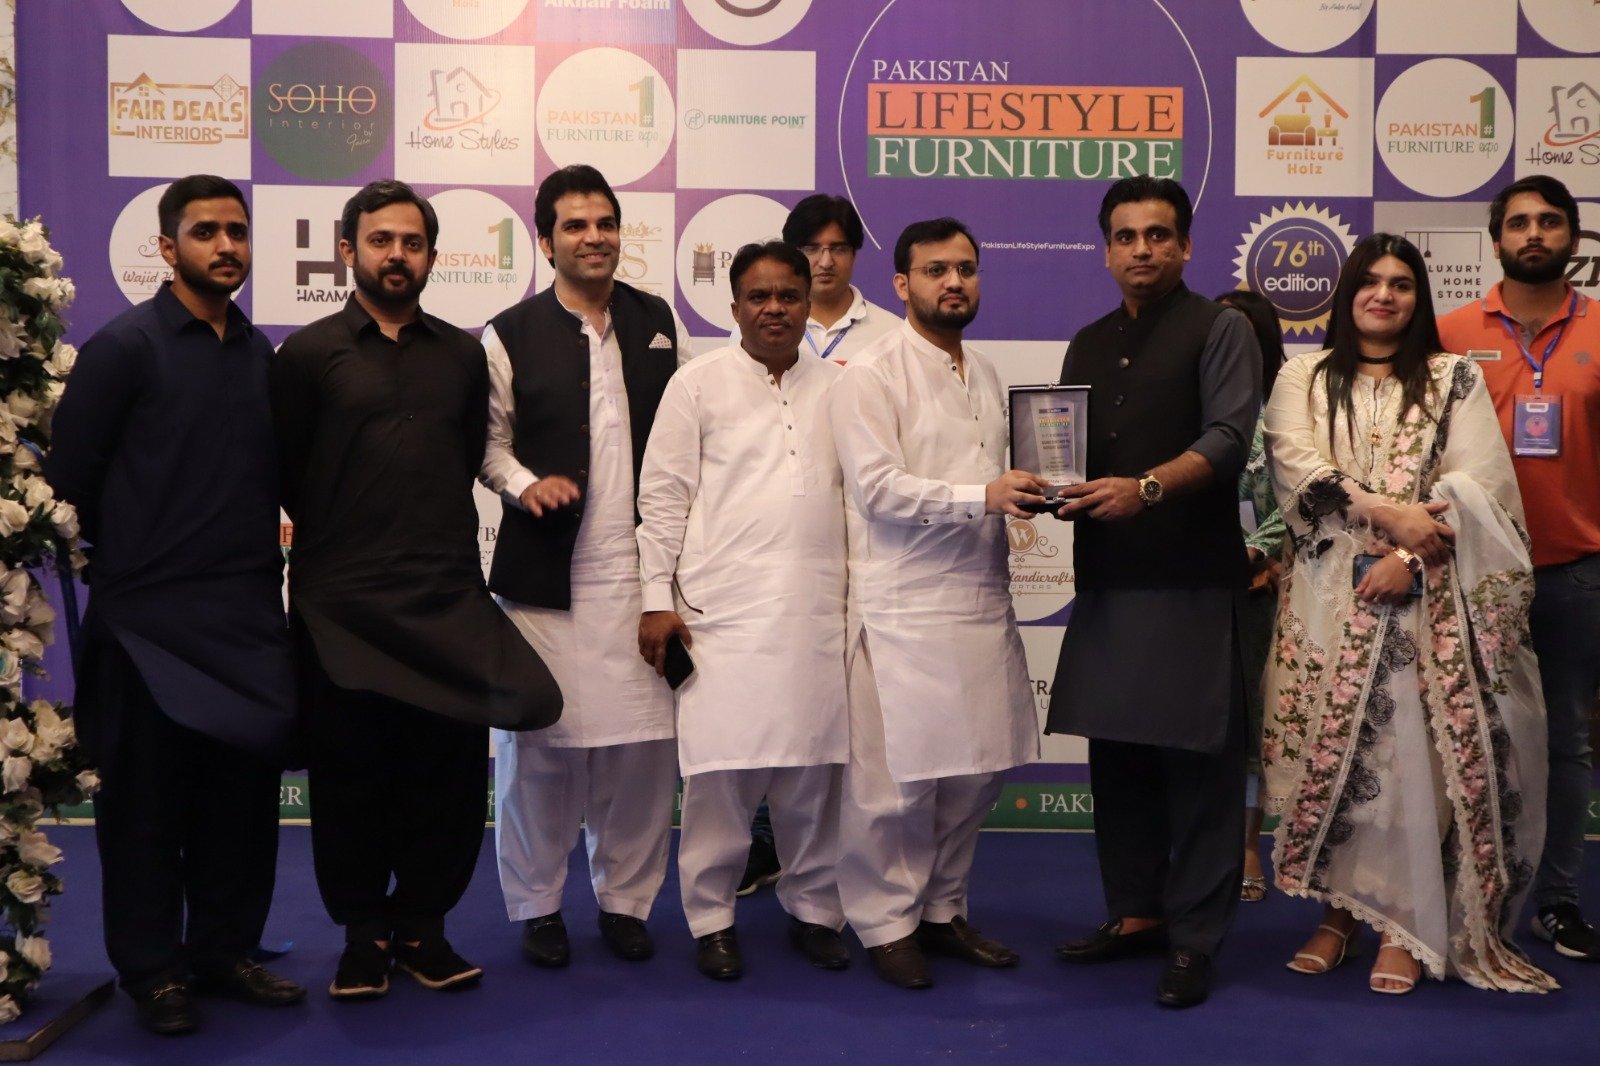 Mr. Sikander Ishfaq Razi #President #GtCCI attended the #Inauguration Ceremony of #Pakistan #Lifestyle #Furniture #Expo 76th edition #Gujrat as #Chief_Guest along with Mr. Muhammad Asad Bhatti #SVP #GtCCI, Mr. Muhammad Masoom Qamar #VP #GtCCI, Mr. Muhammad Usman Muzaffar Secretary General #GtCCI and Mr. Abubakar Bhutta at Grand Continental Marquee. A number of well reputed furniture #brands displayed their products in the Exhibition.